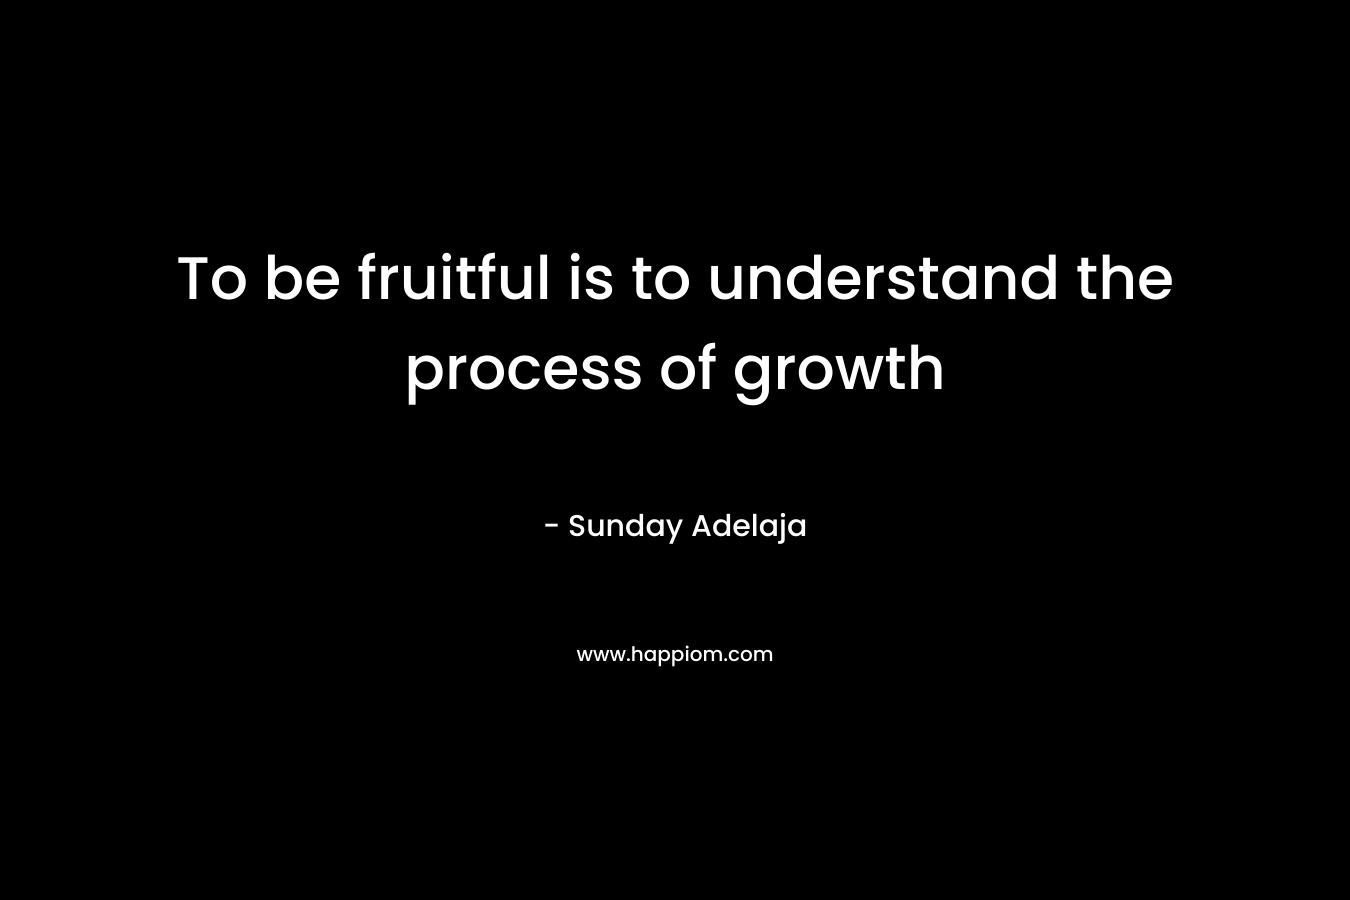 To be fruitful is to understand the process of growth